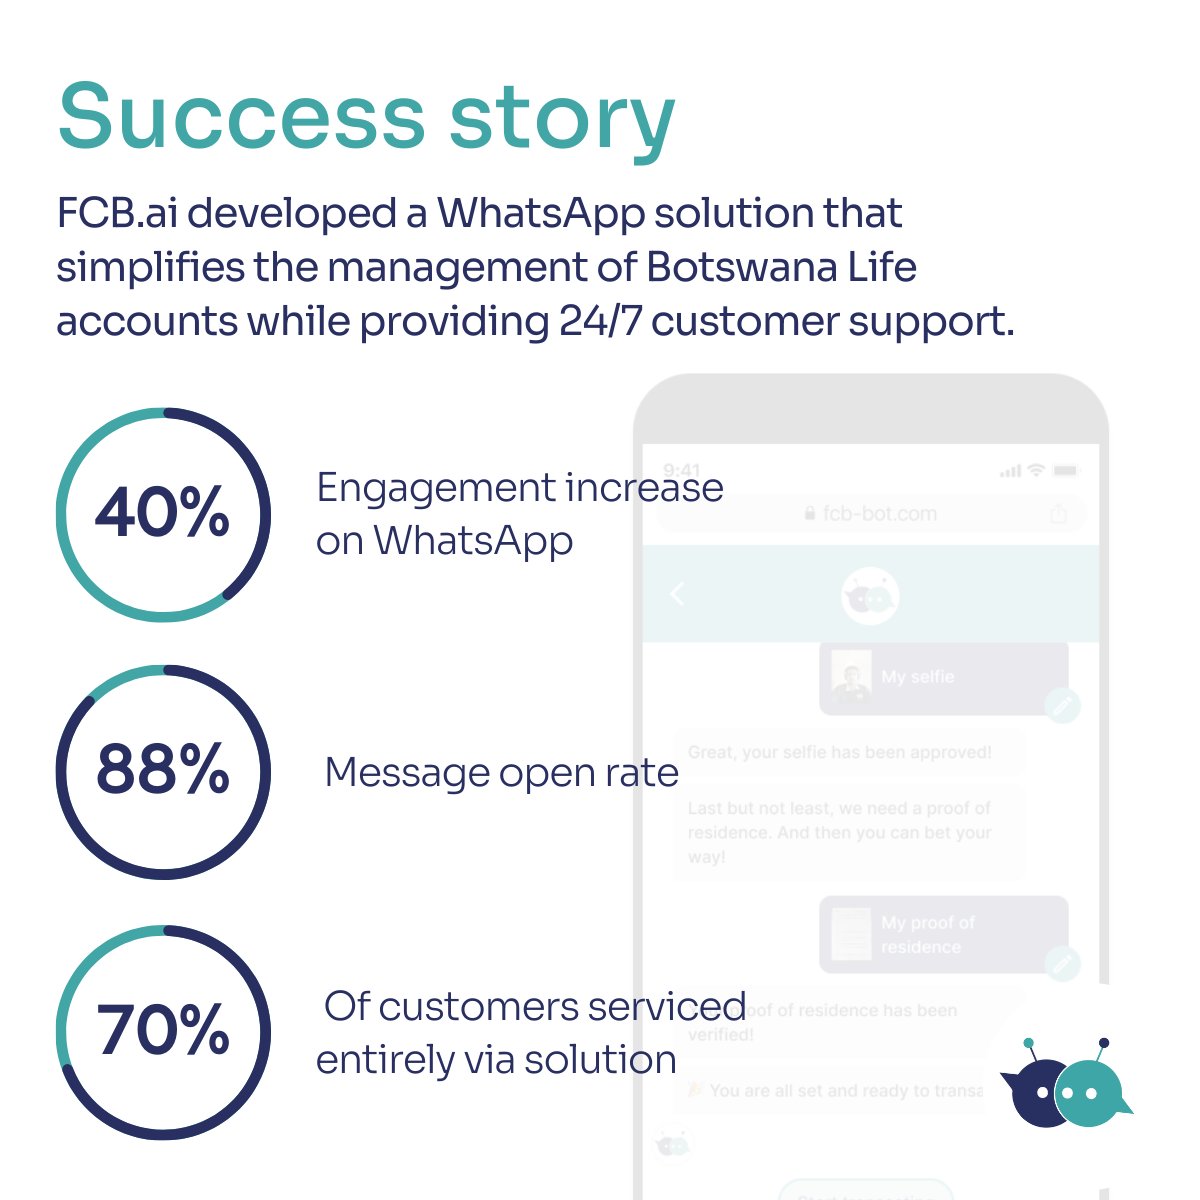 Enhance customer relationships and seize new opportunities with WhatsApp Business API💬🔥

Reports show 3x higher engagement rates compared to SMS. Enjoy real-time conversations and effortless re-engagement.

#WhatsAppBusinessAPI #HighEngagement #RealTimeConversations